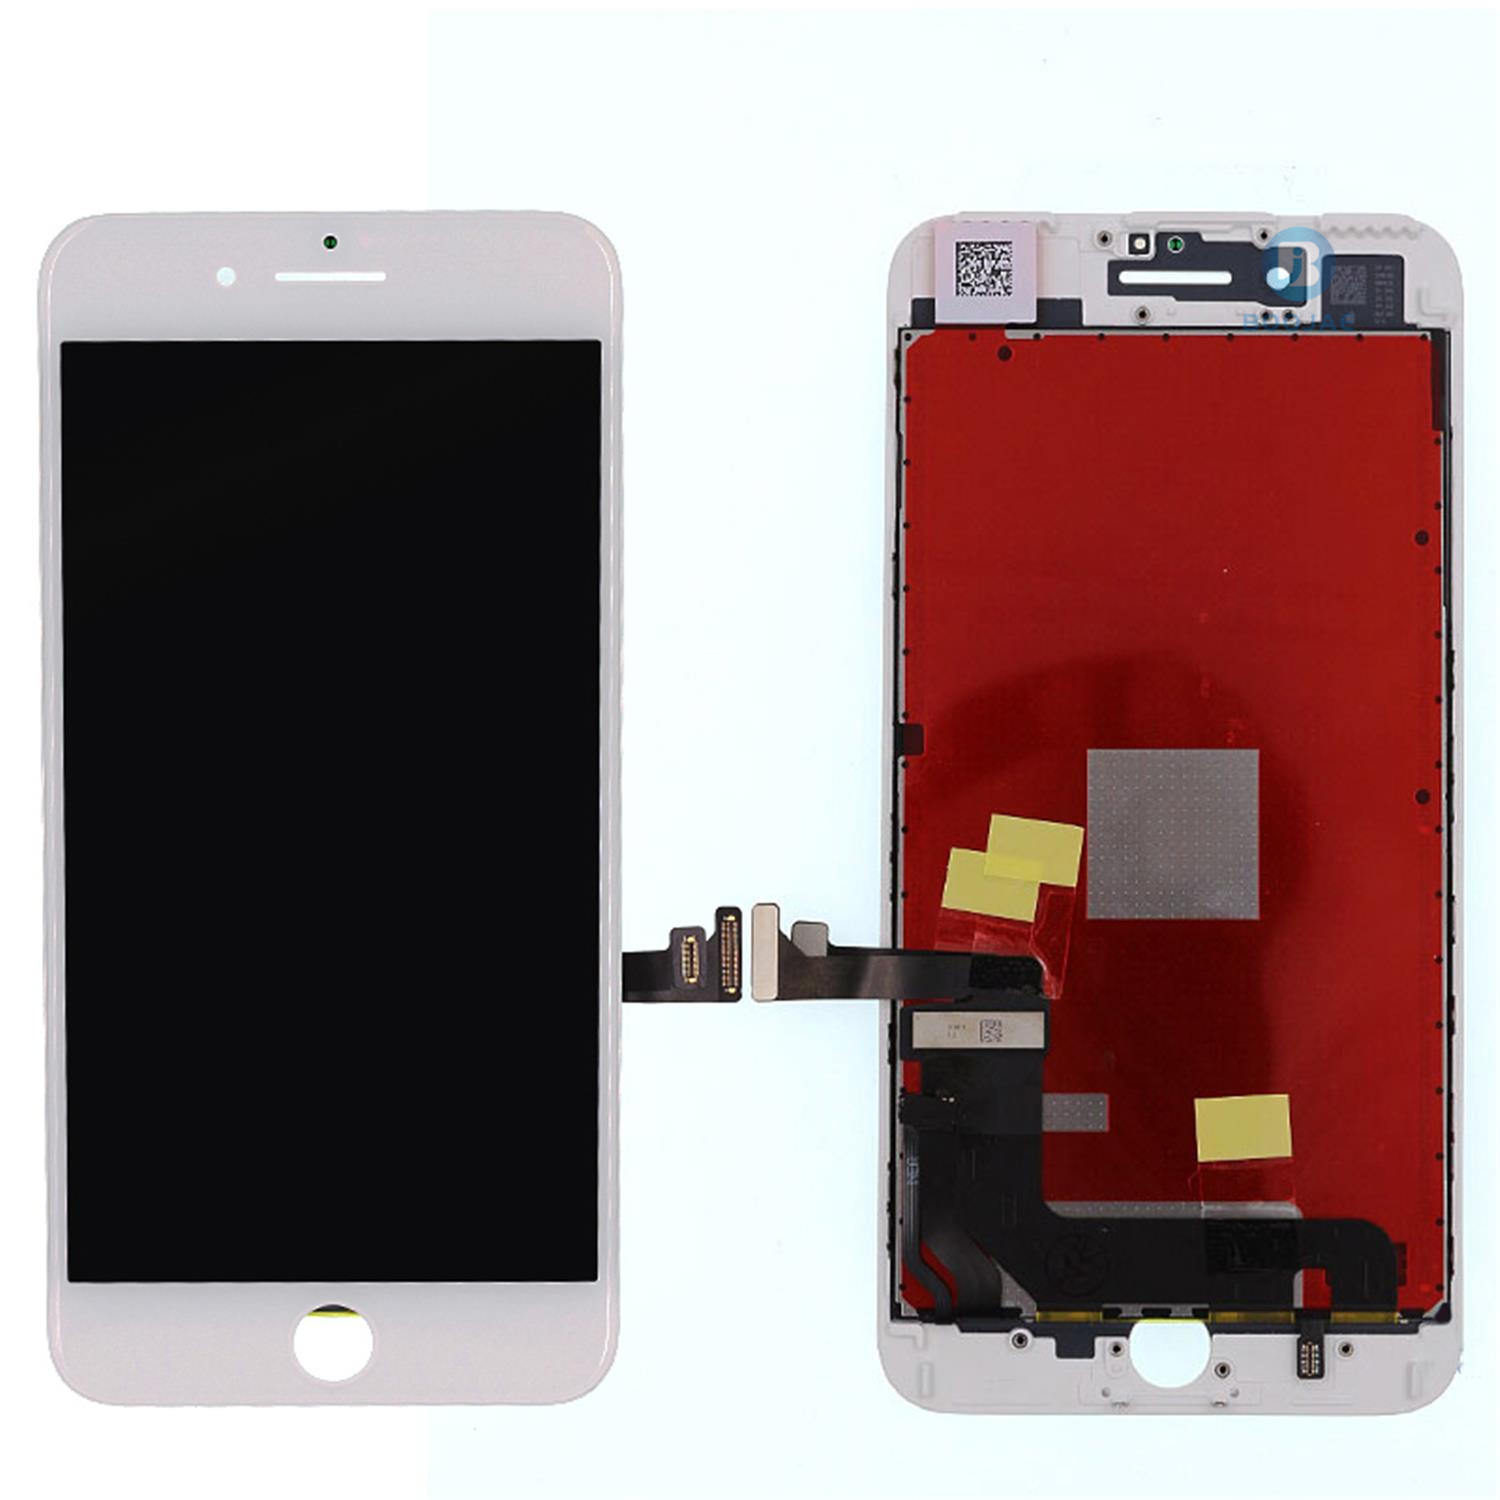 iPhone 7 Plus LCD Screen Display and Touch Panel Digitizer Assembly Replacement